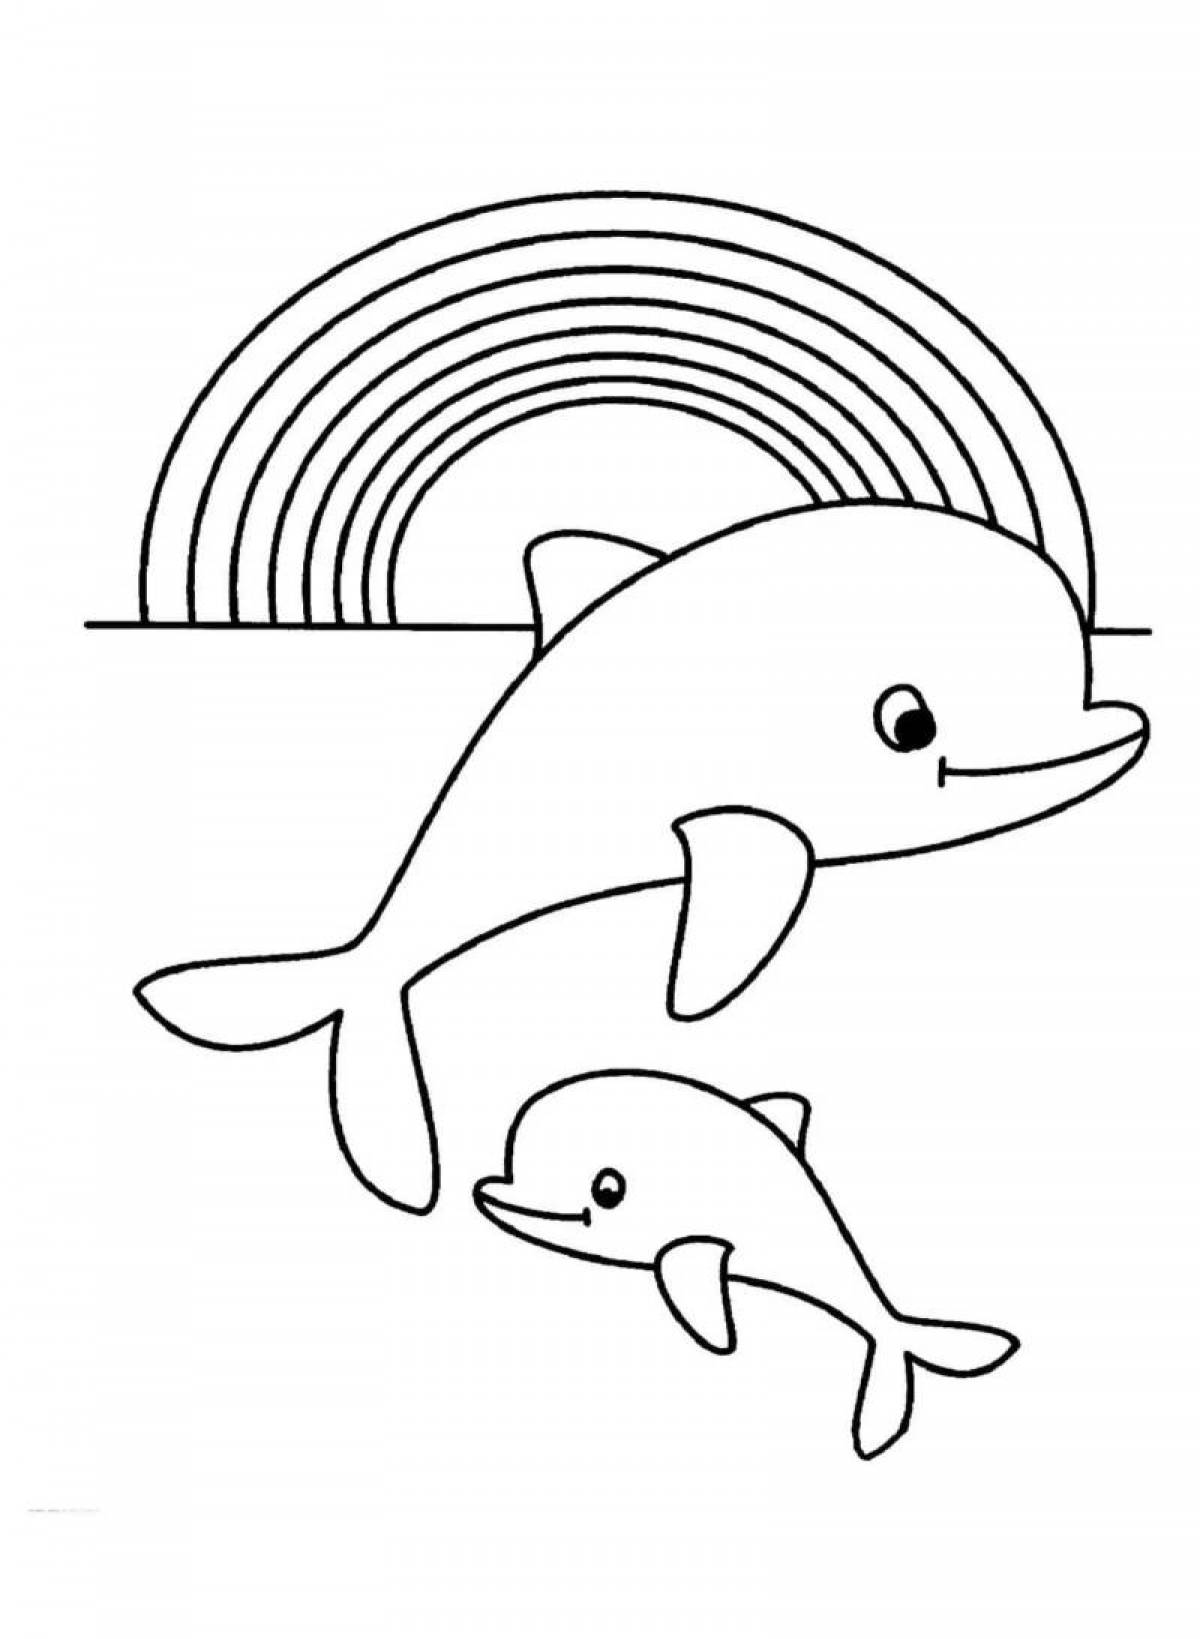 A fun dolphin coloring book for kids